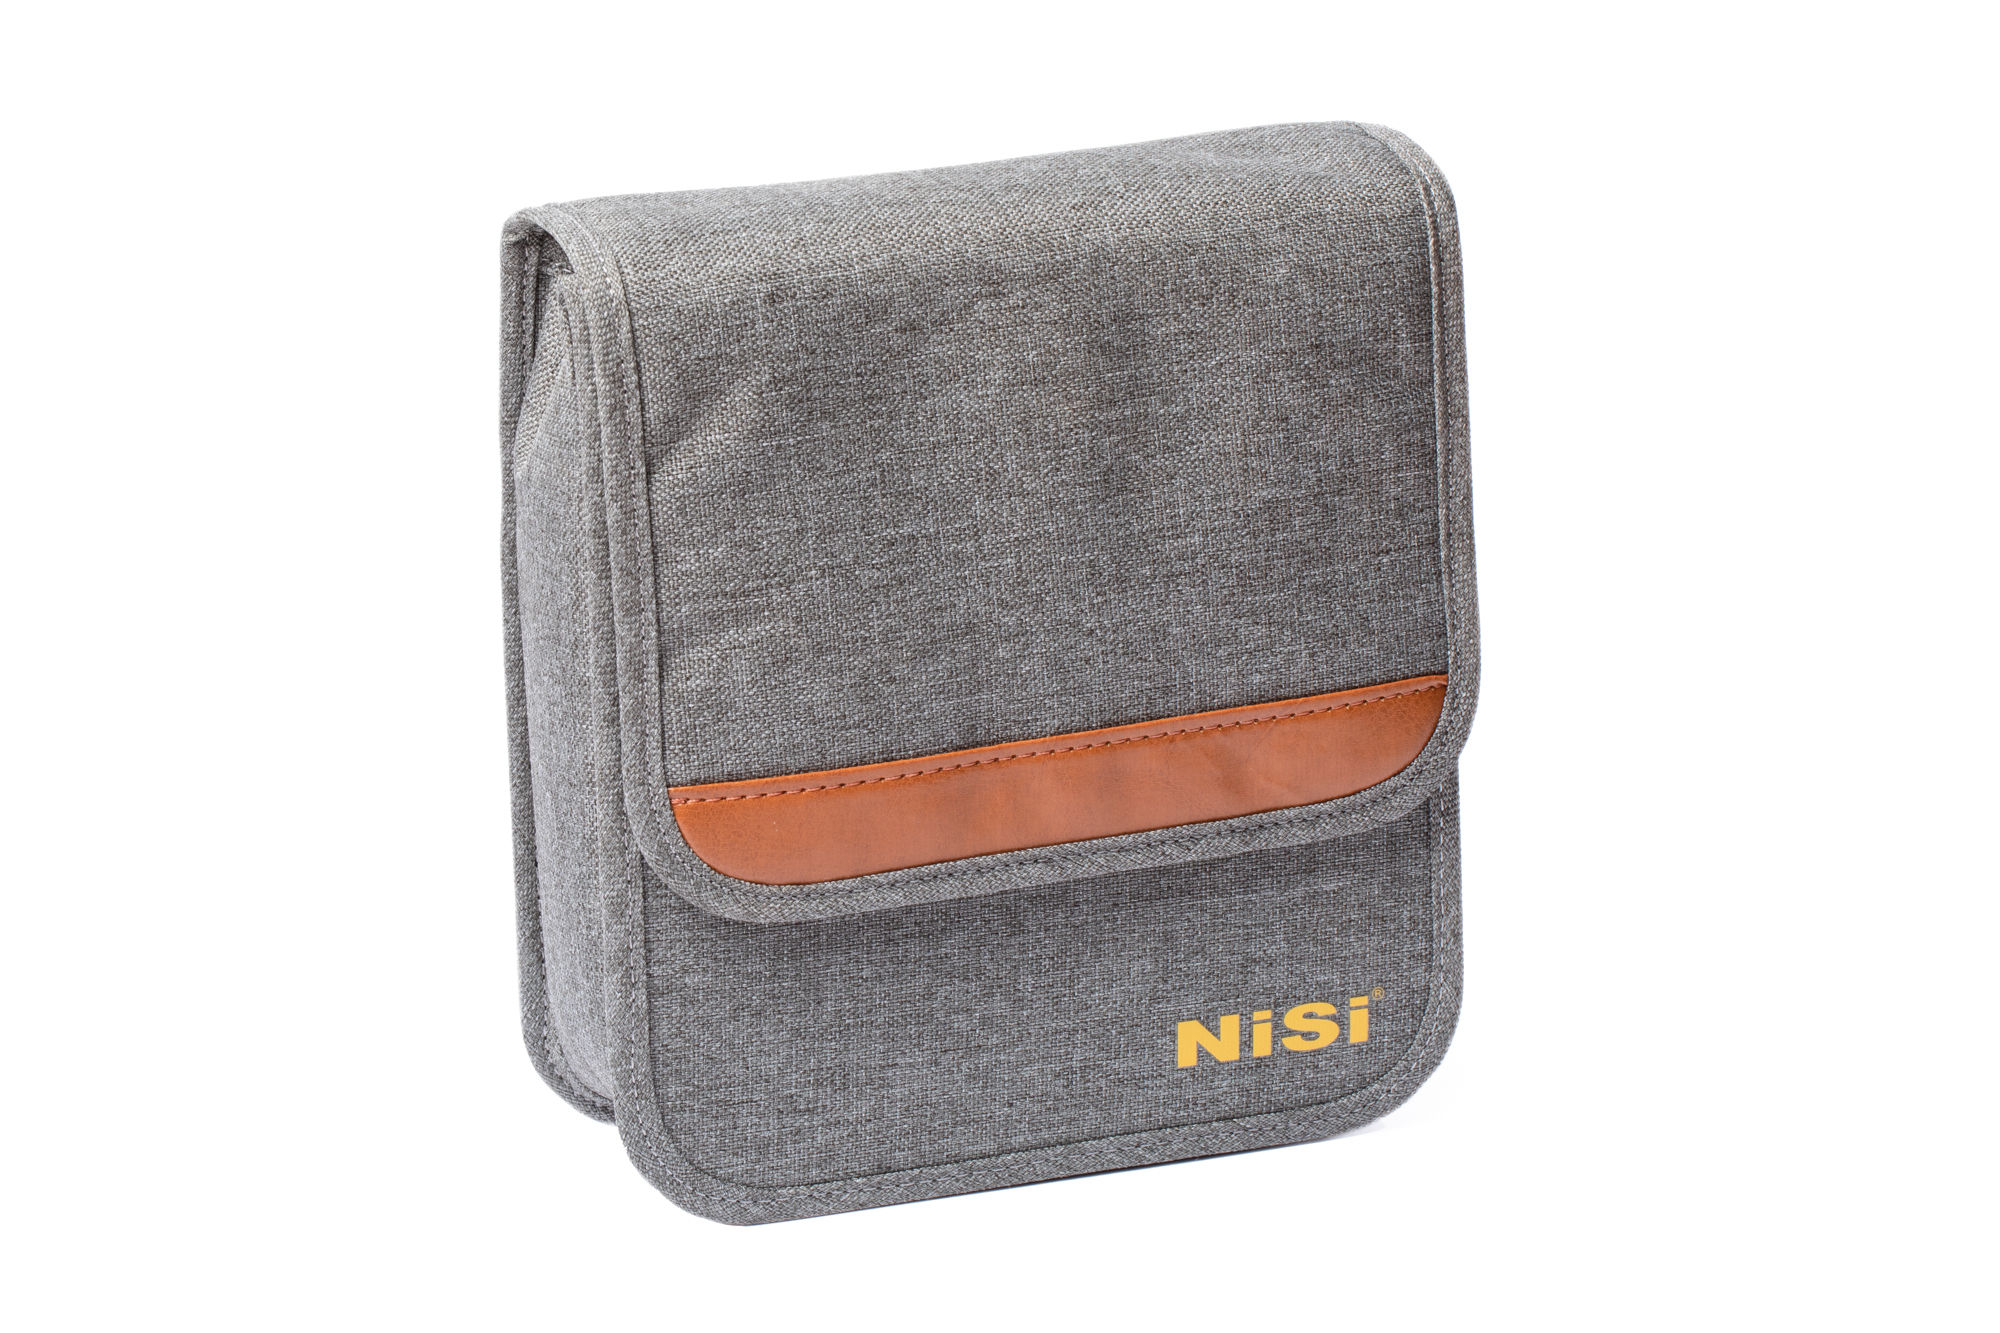 NiSi S6 150mm Filter Holder Kit with Pro CPL for Sigma 14mm f/1.8 